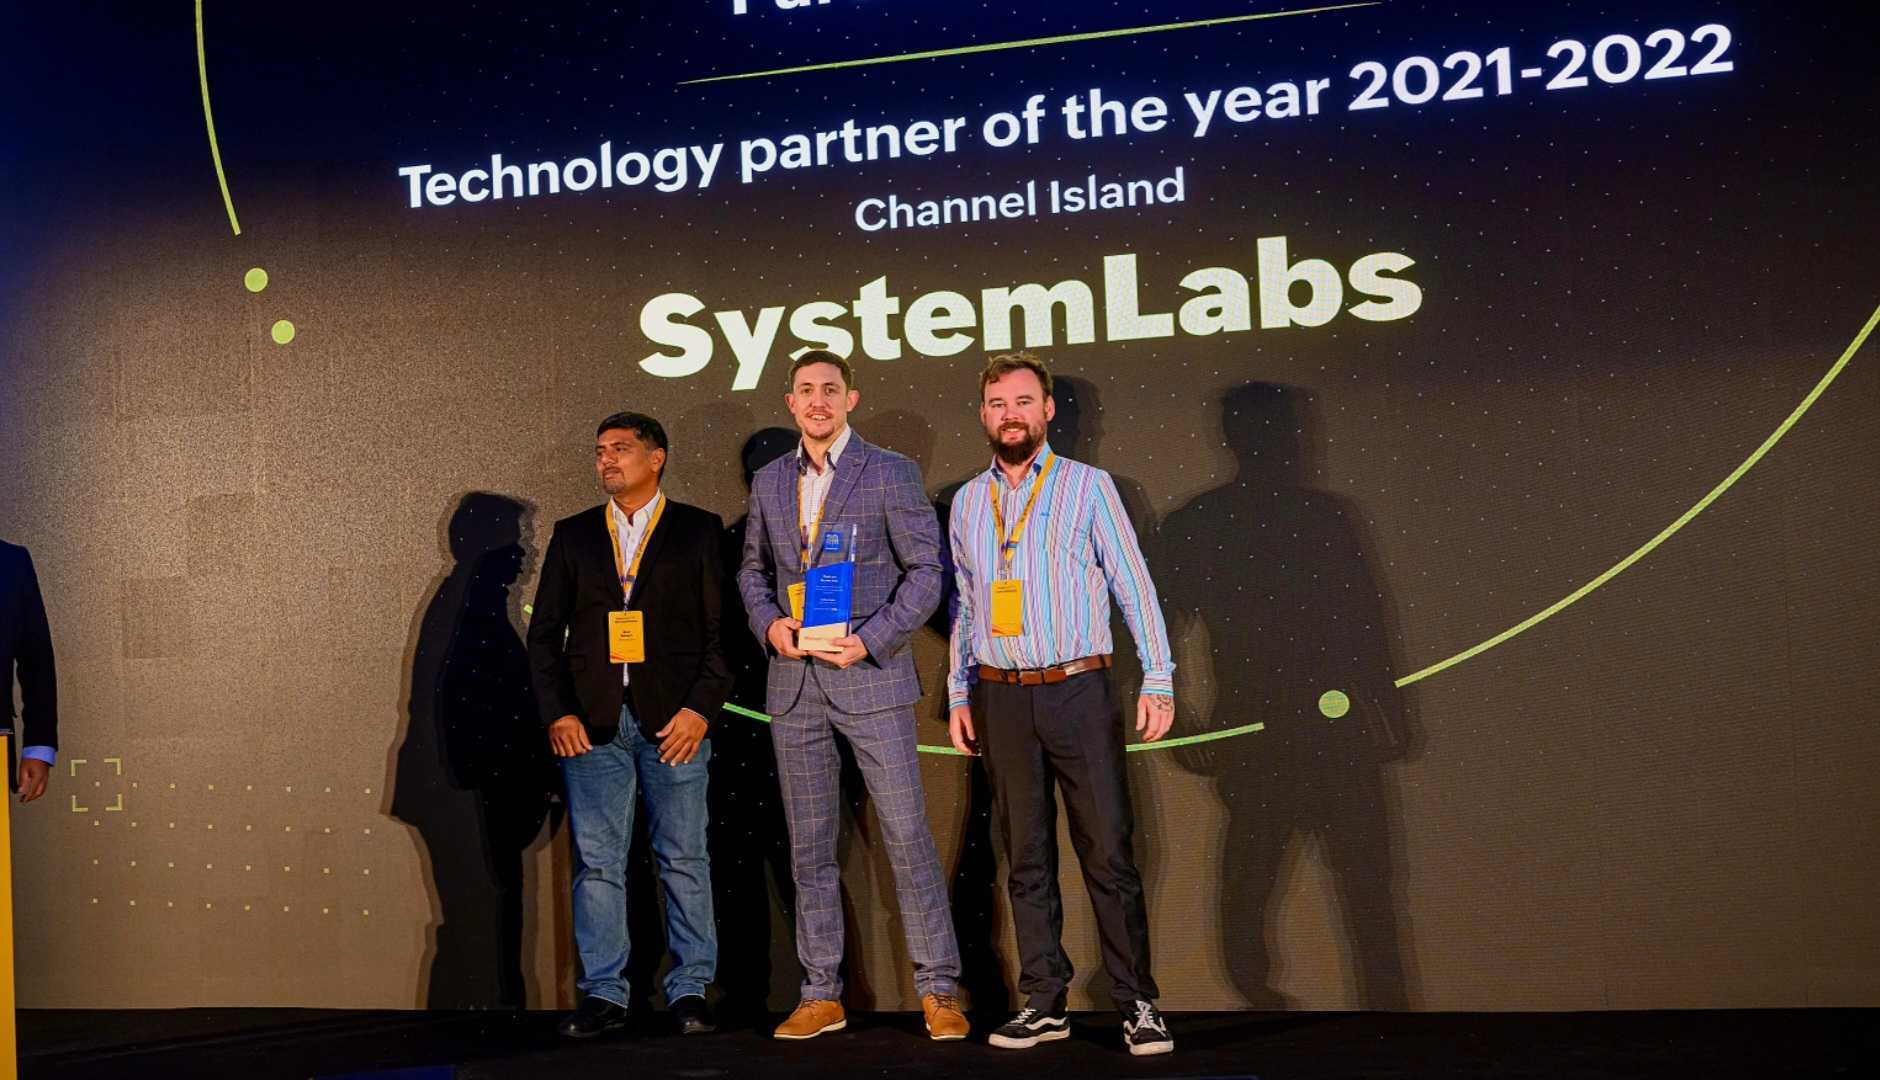 We are Technology Partner of the Year